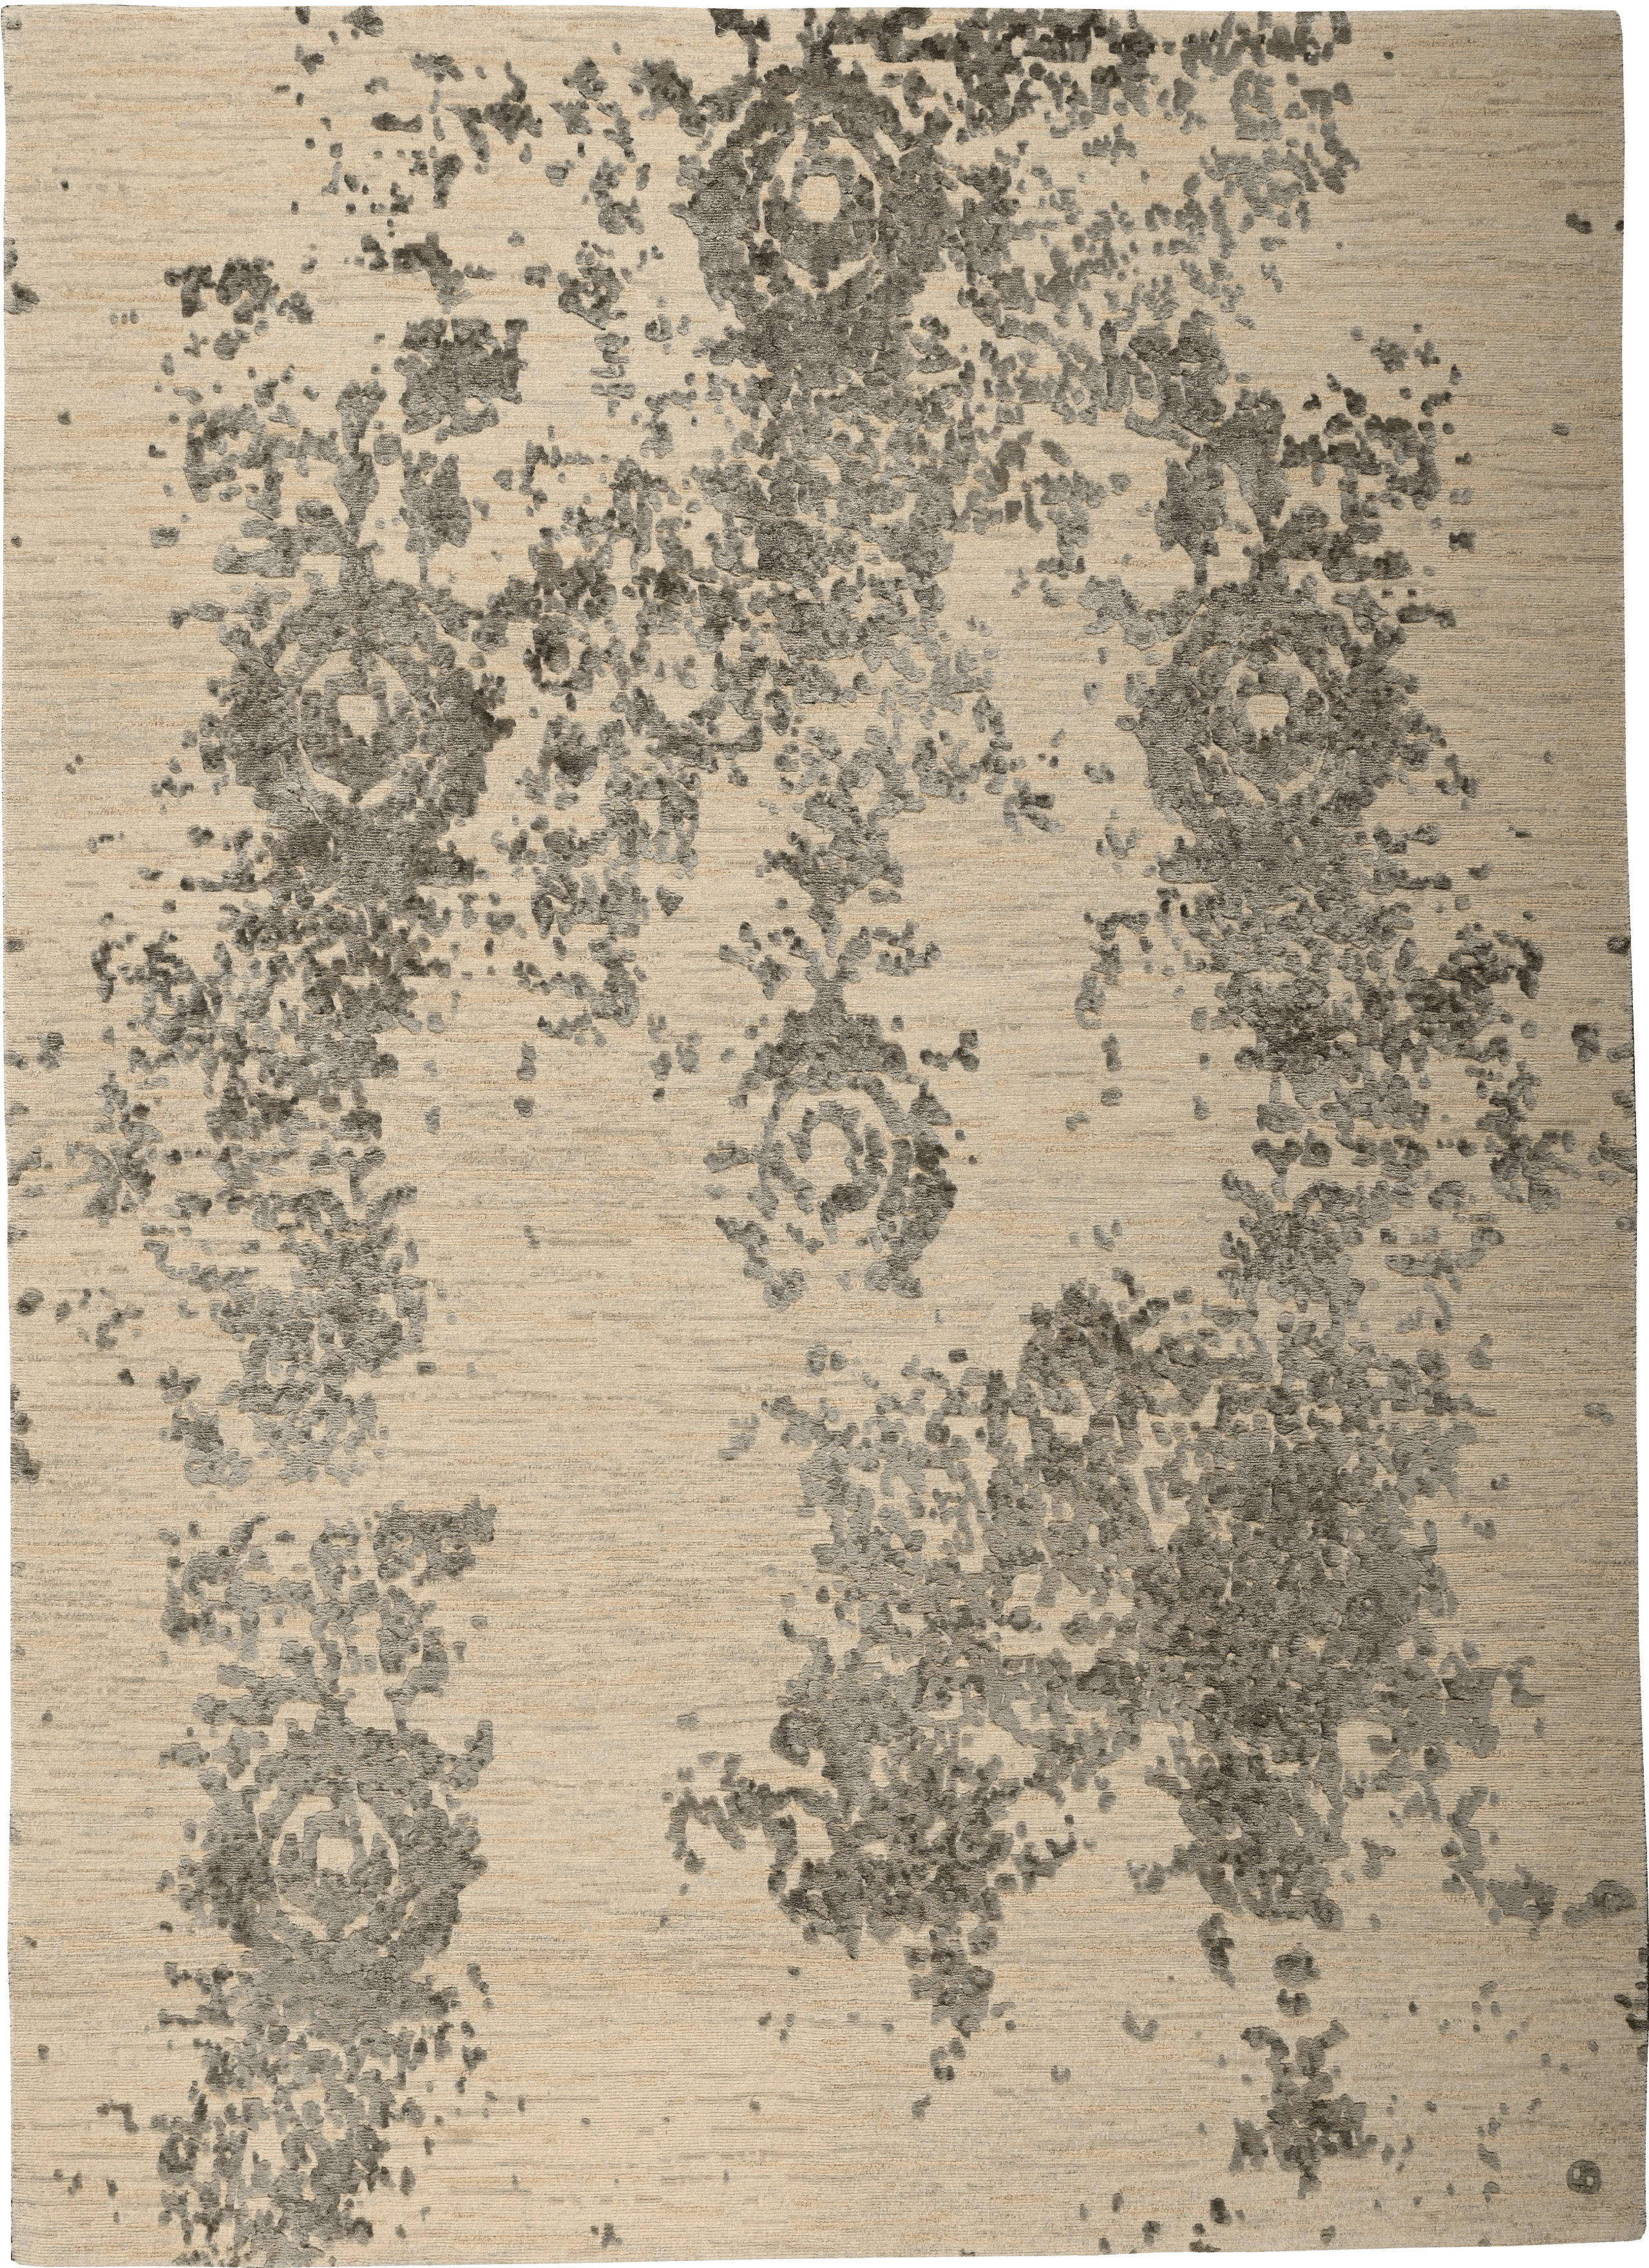 Geba carpet "Vintage grey" with oranments made of silk in grey on beige background made of sheep's wool, from Nepal, 100 knot, 65% sheep's wool and 35% chinese silk - product picture - Geba carpet